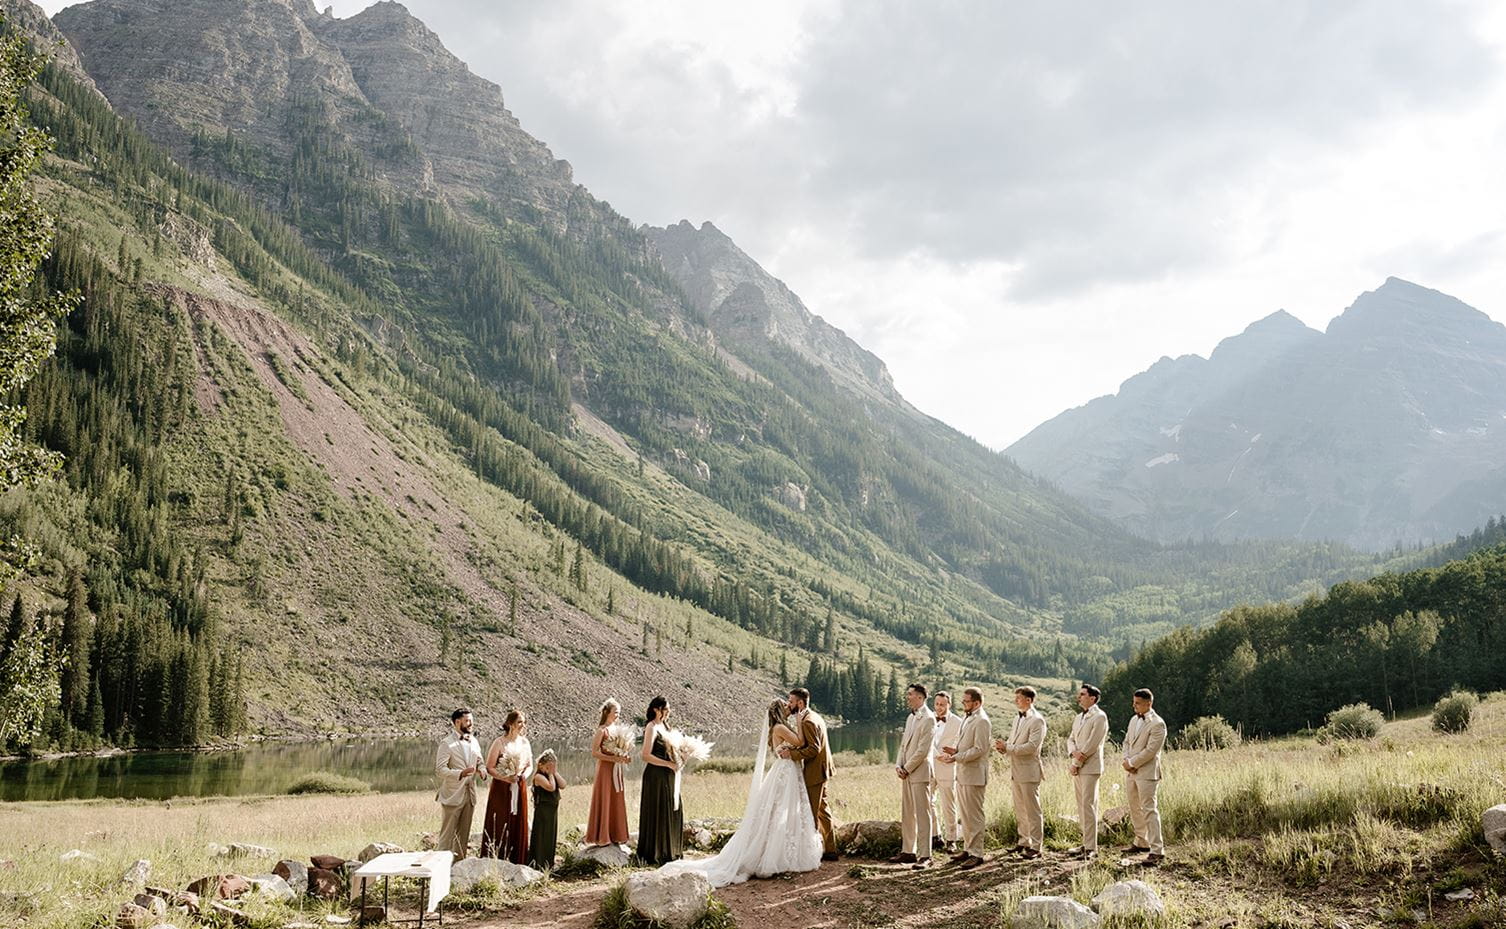 Couple getting married at Maroon Bells near Aspen, Colorado